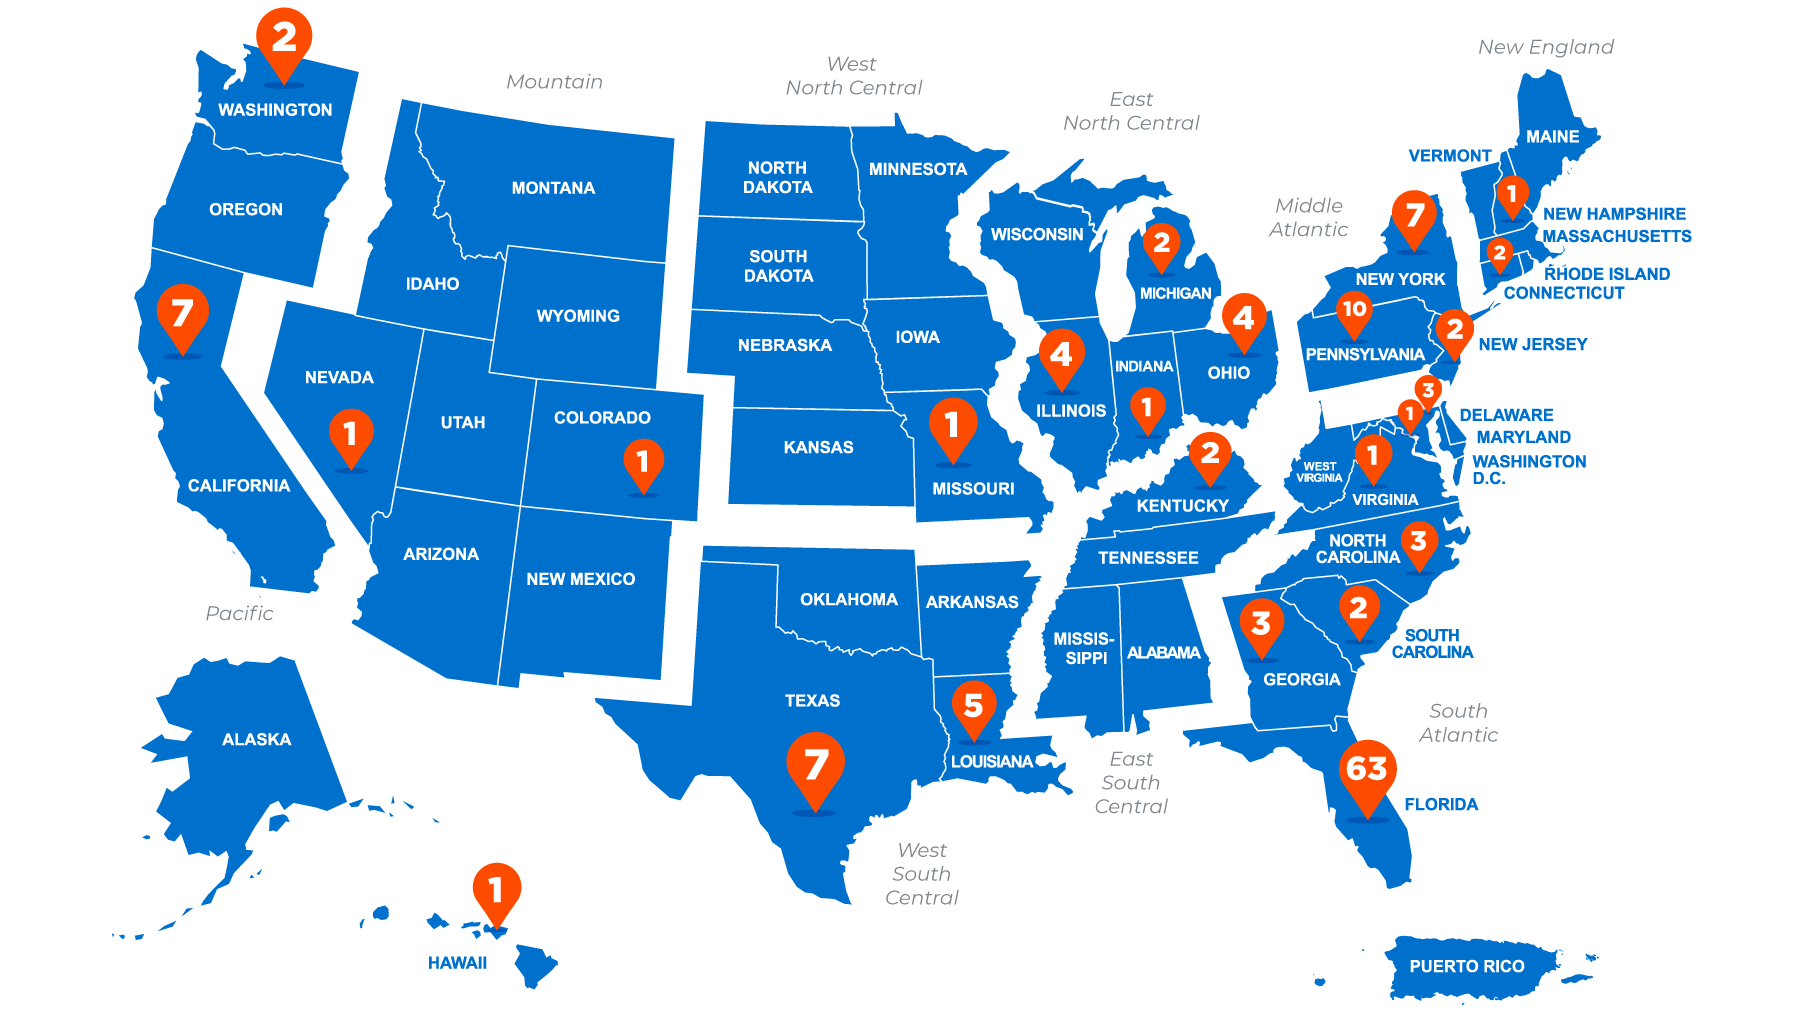 Map of the United States with numbers on each state indicating number of students matched to residencies in that state, aggregated over the past three years..